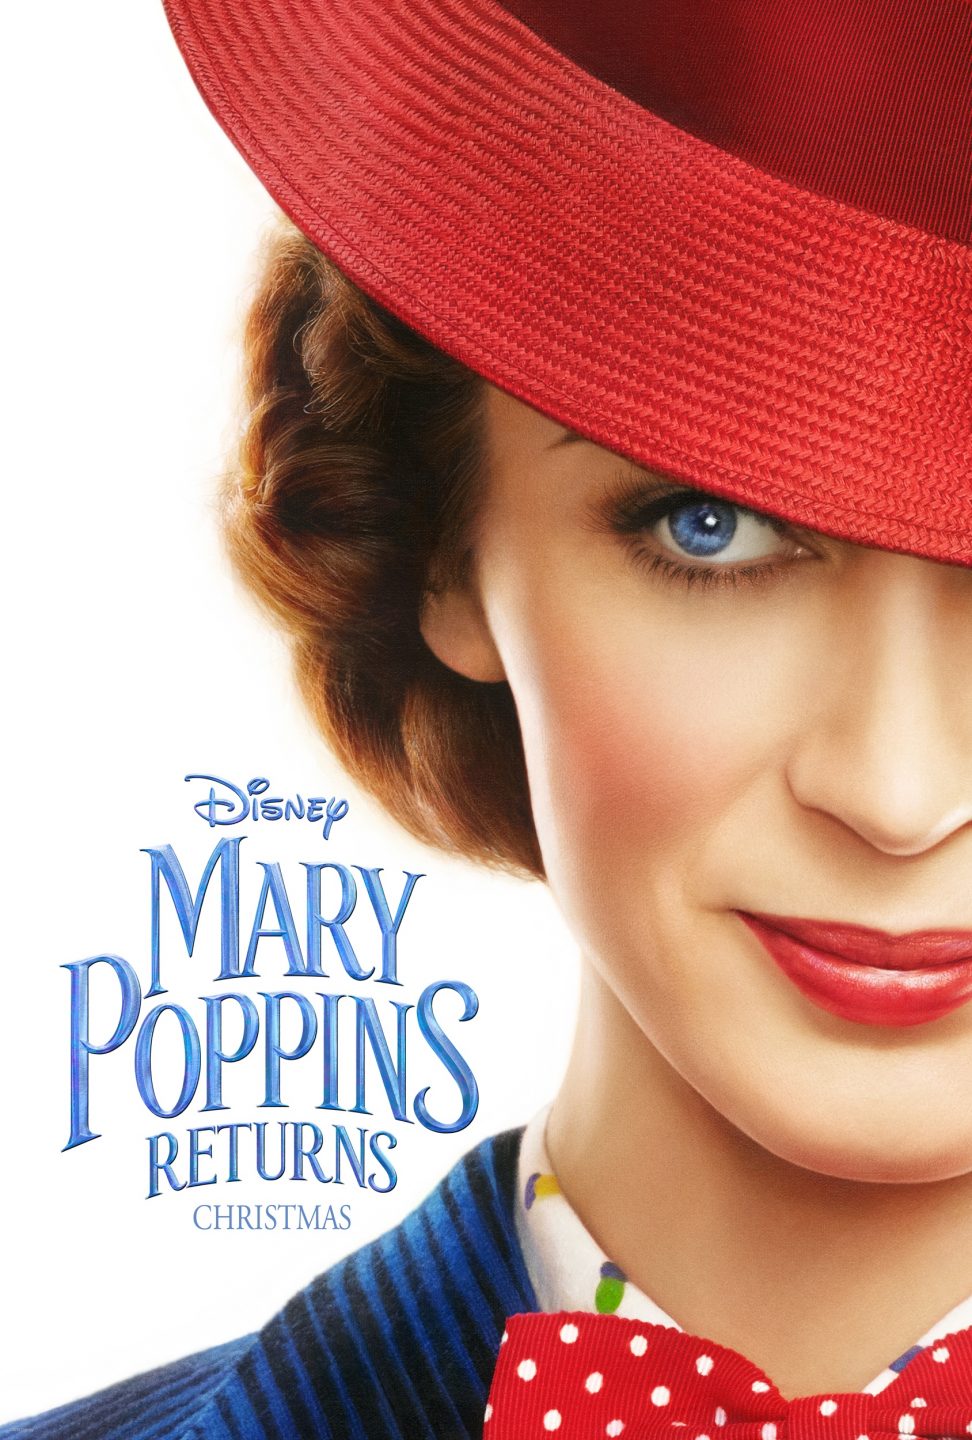 Mary Poppins Returns poster (Walt Disney Pictures)